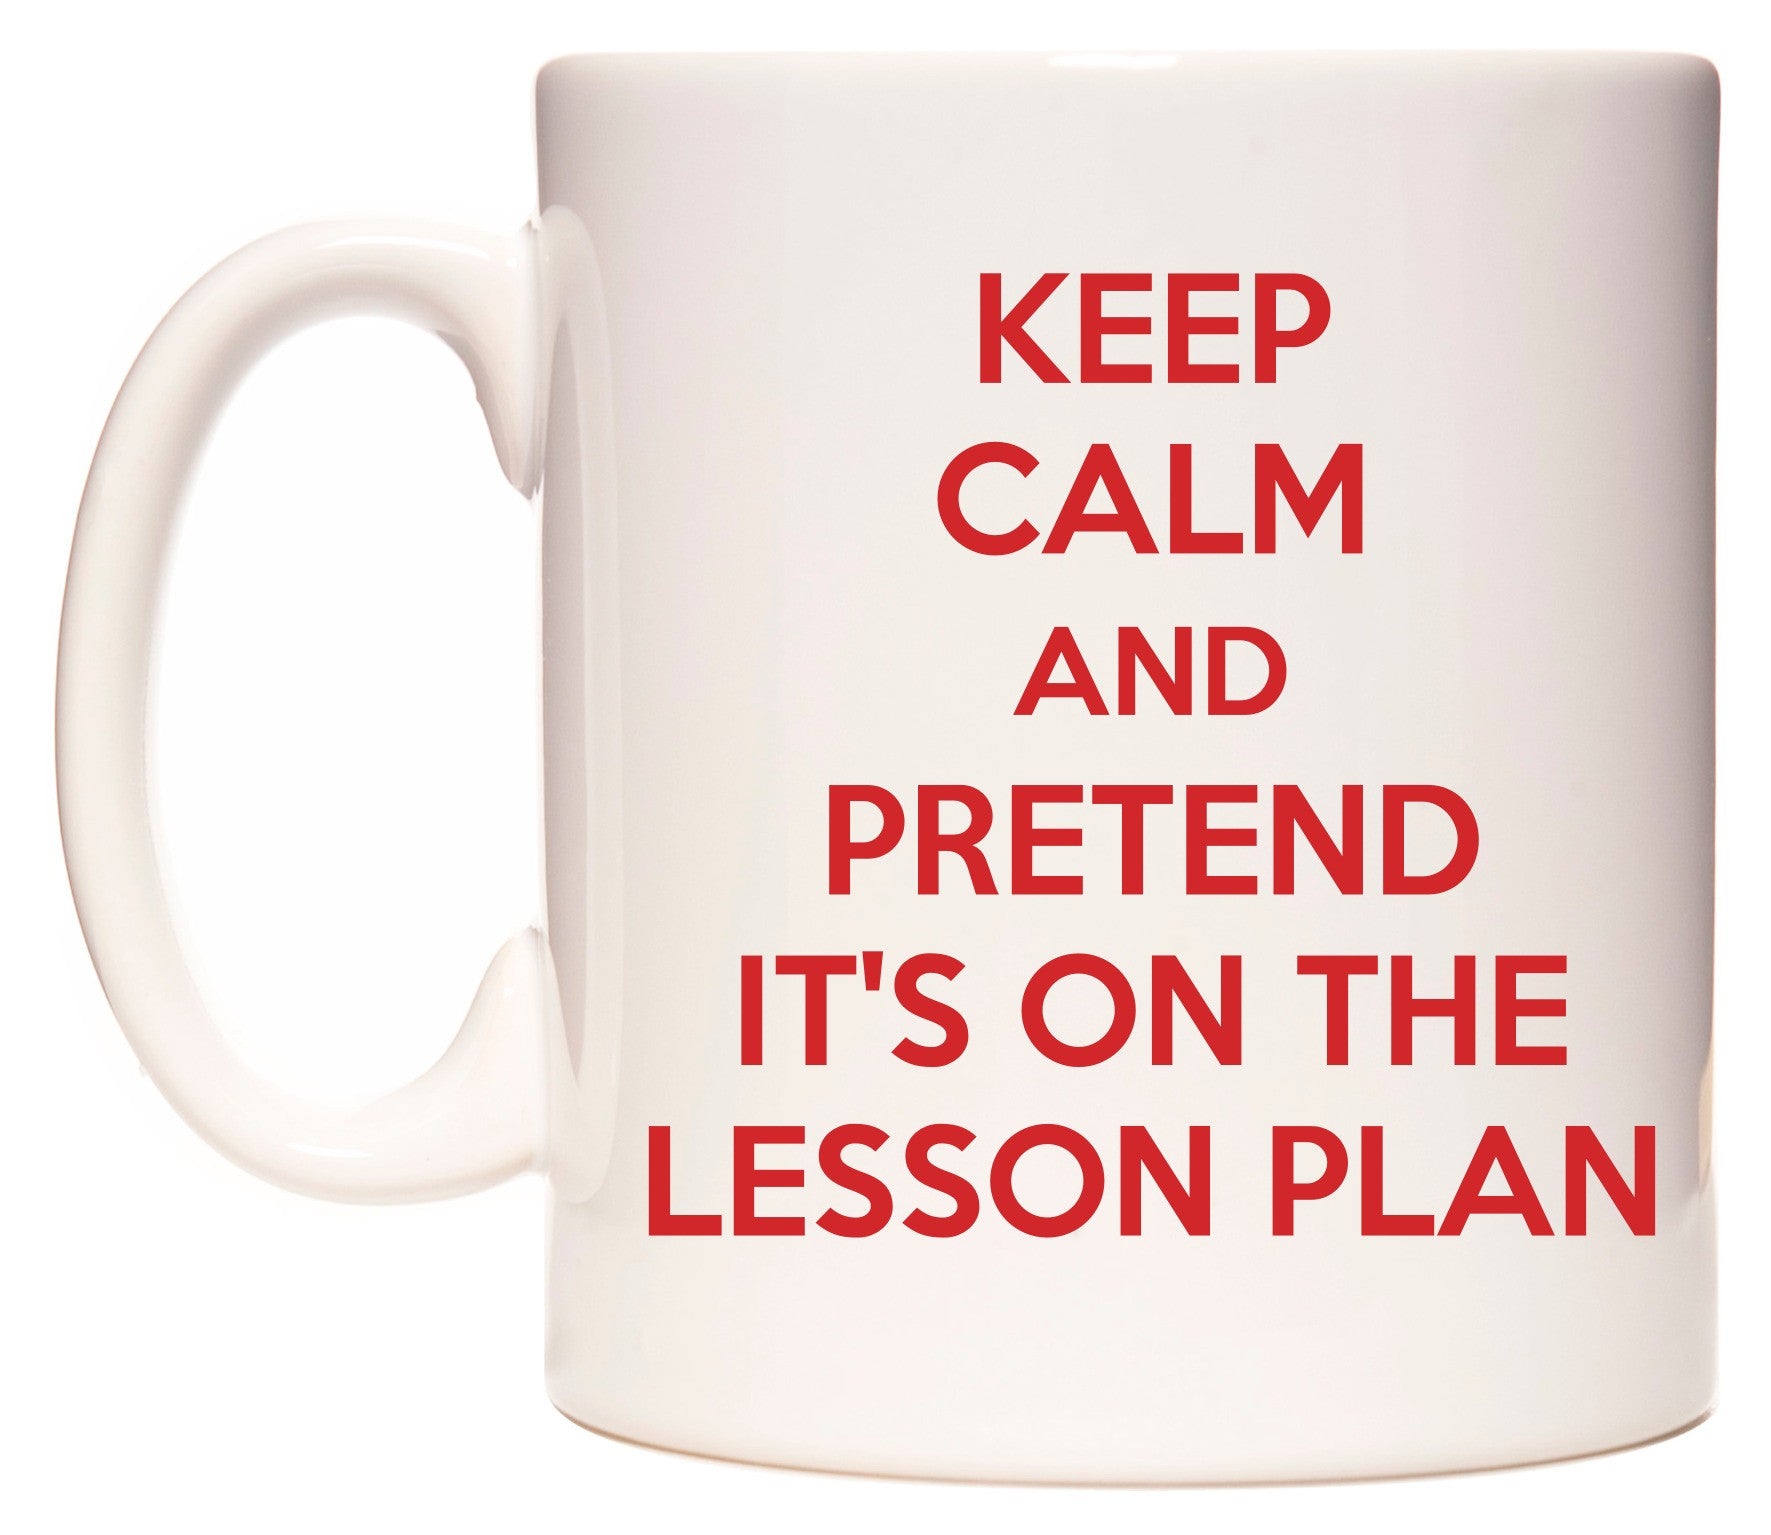 This mug features Keep Calm and Pretend it's on the Lesson Plan